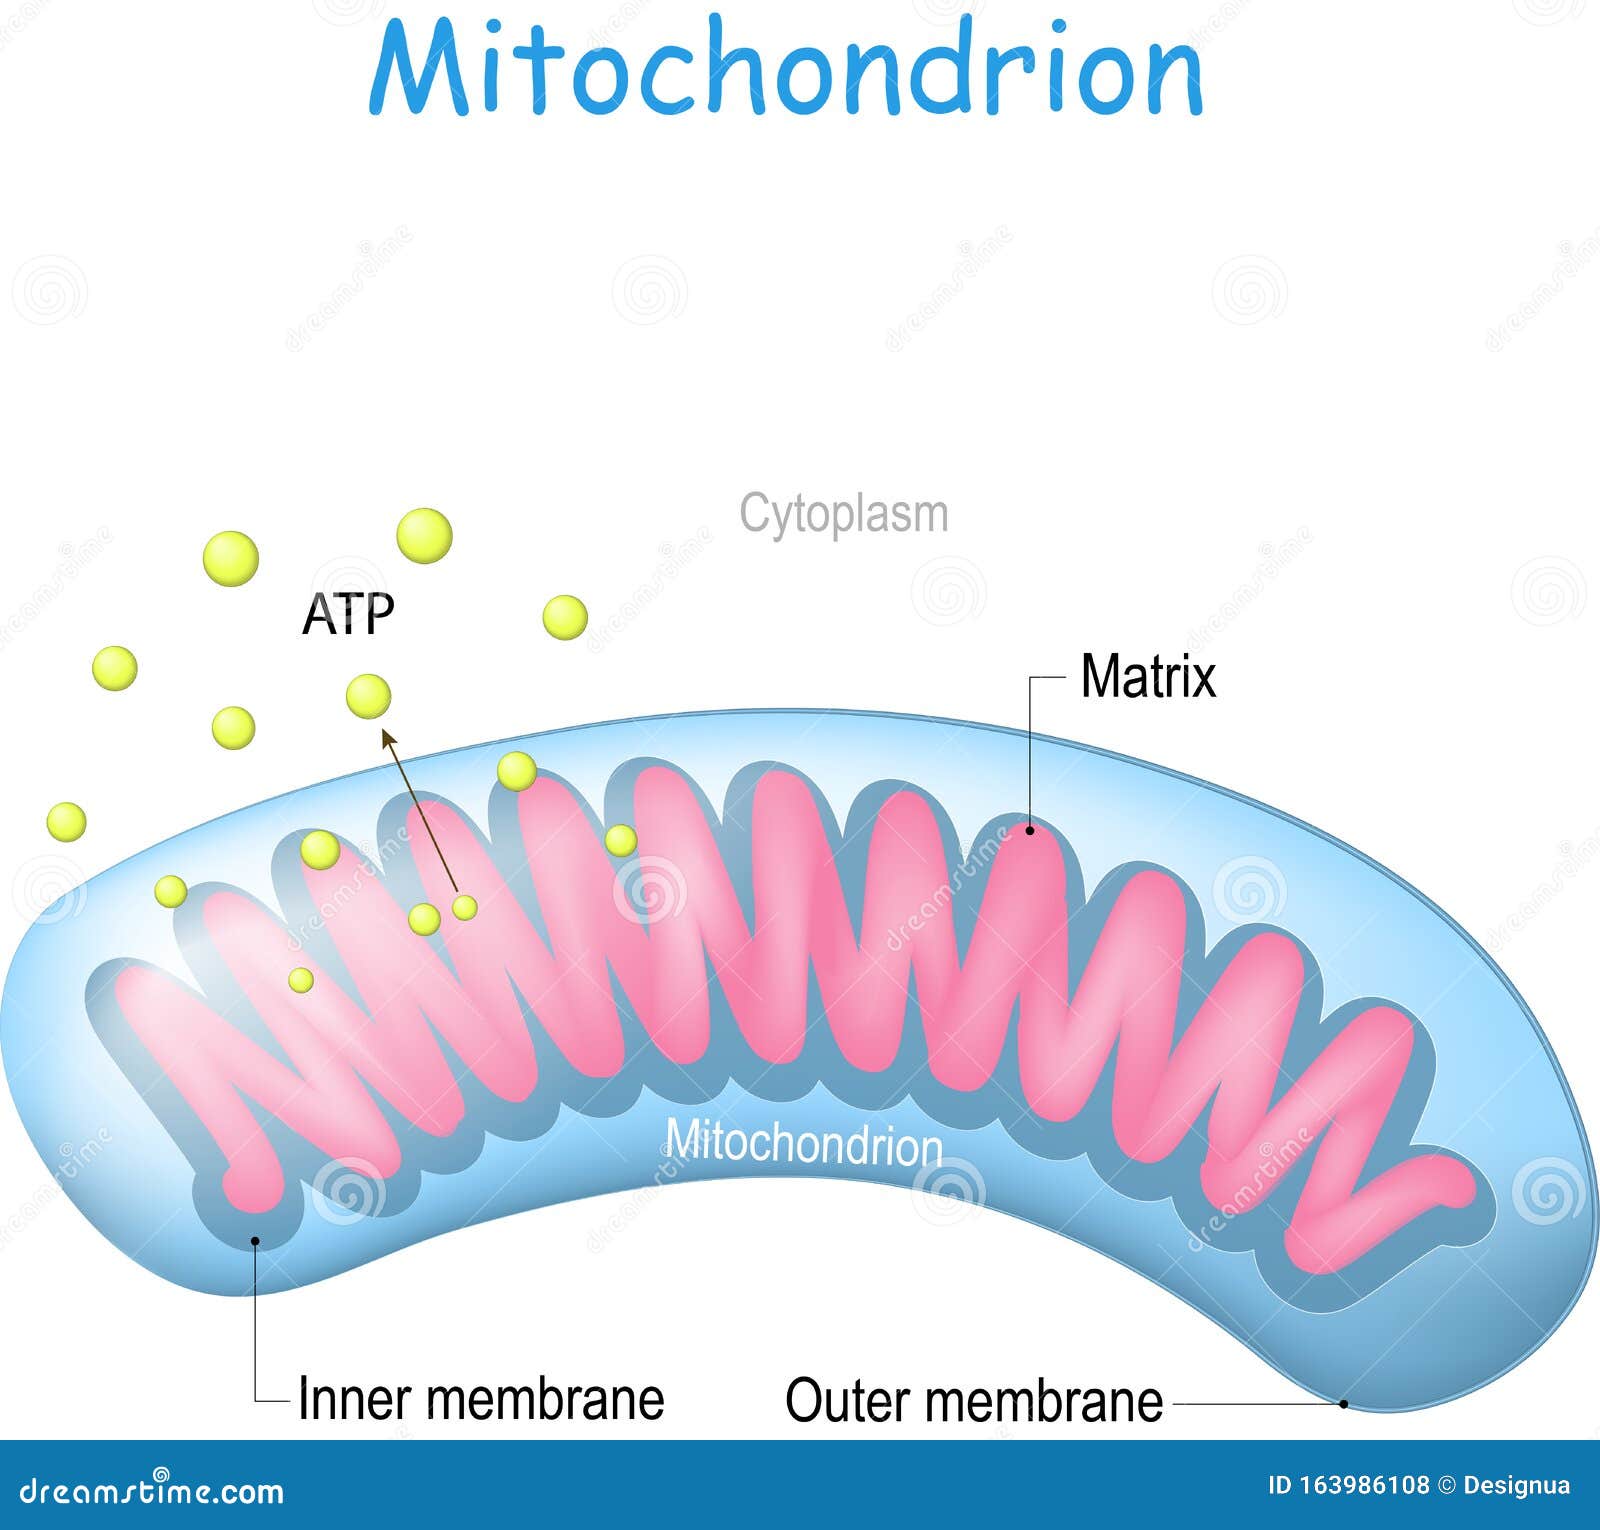 mitochondrion anatomy. structure of cell organelle